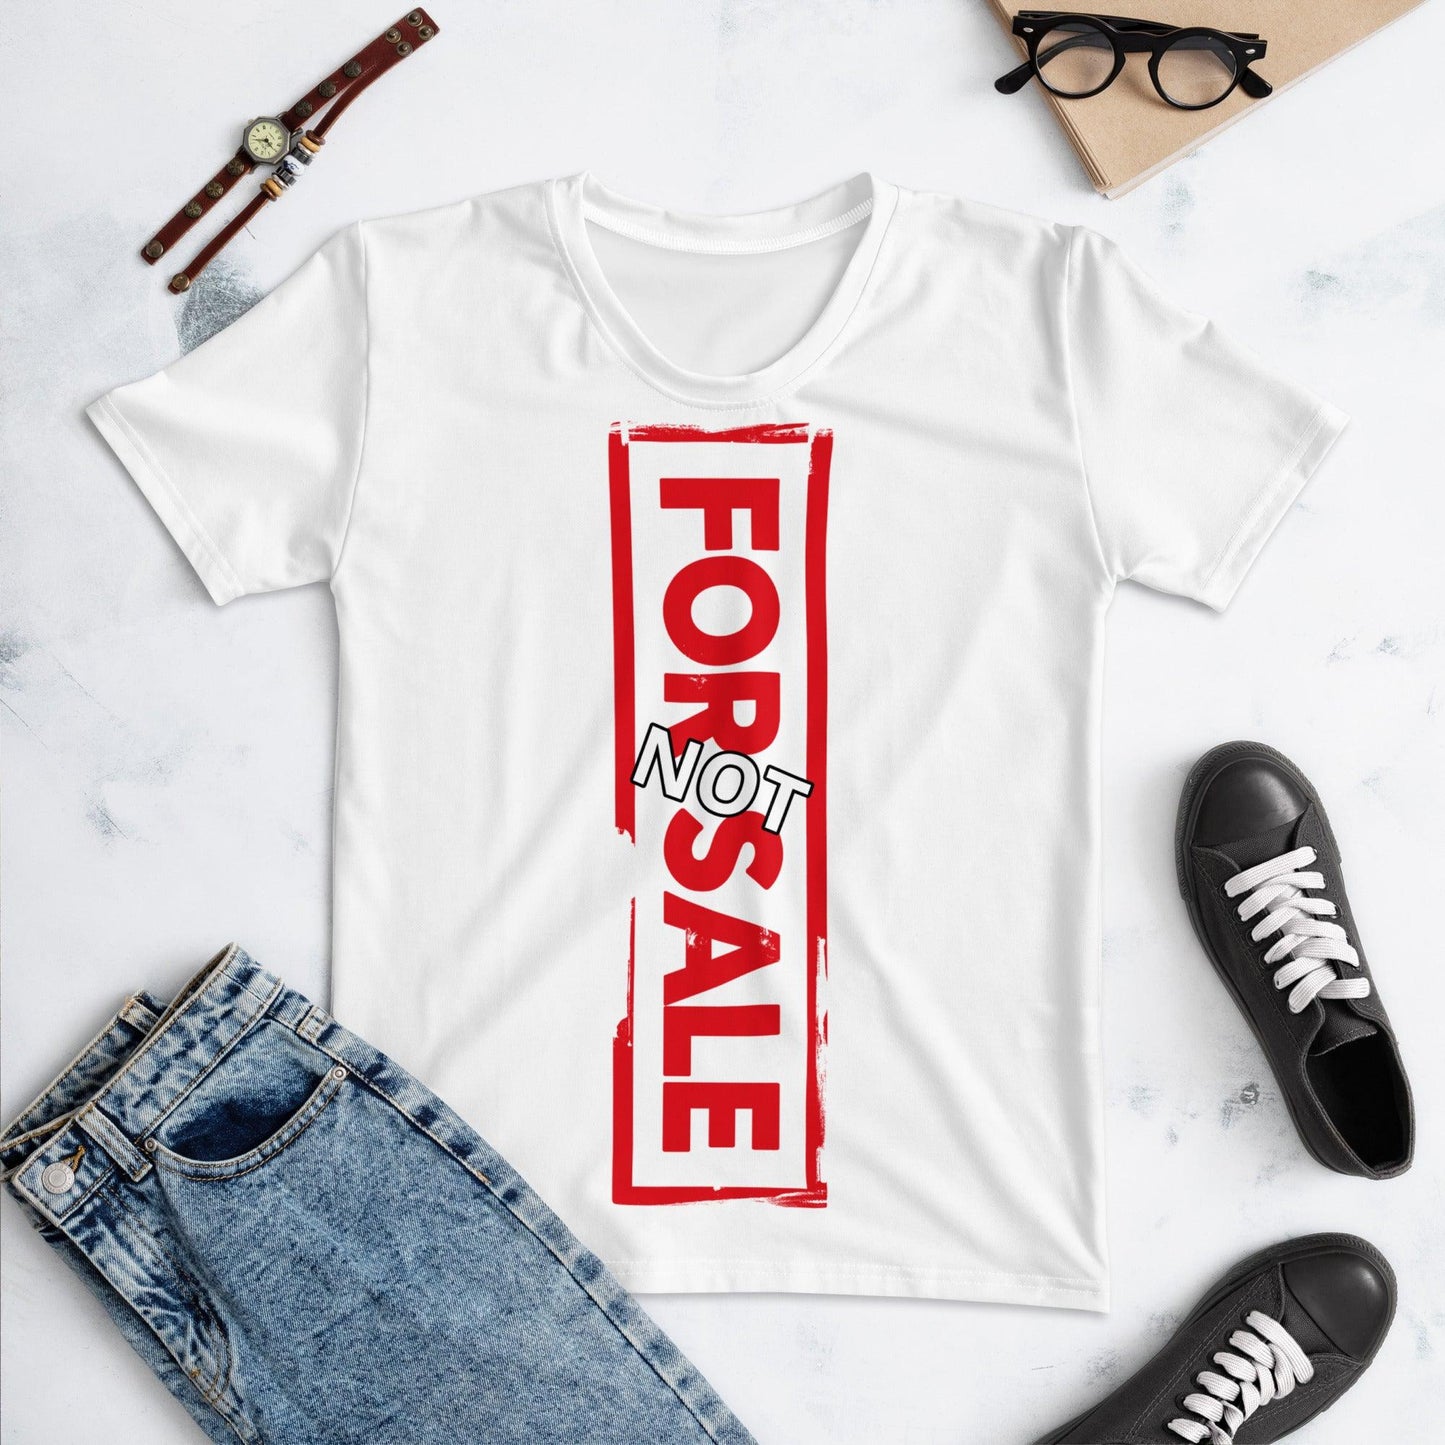 Not For Sale Red Stamp - Womens T-Shirt - iSAW Company